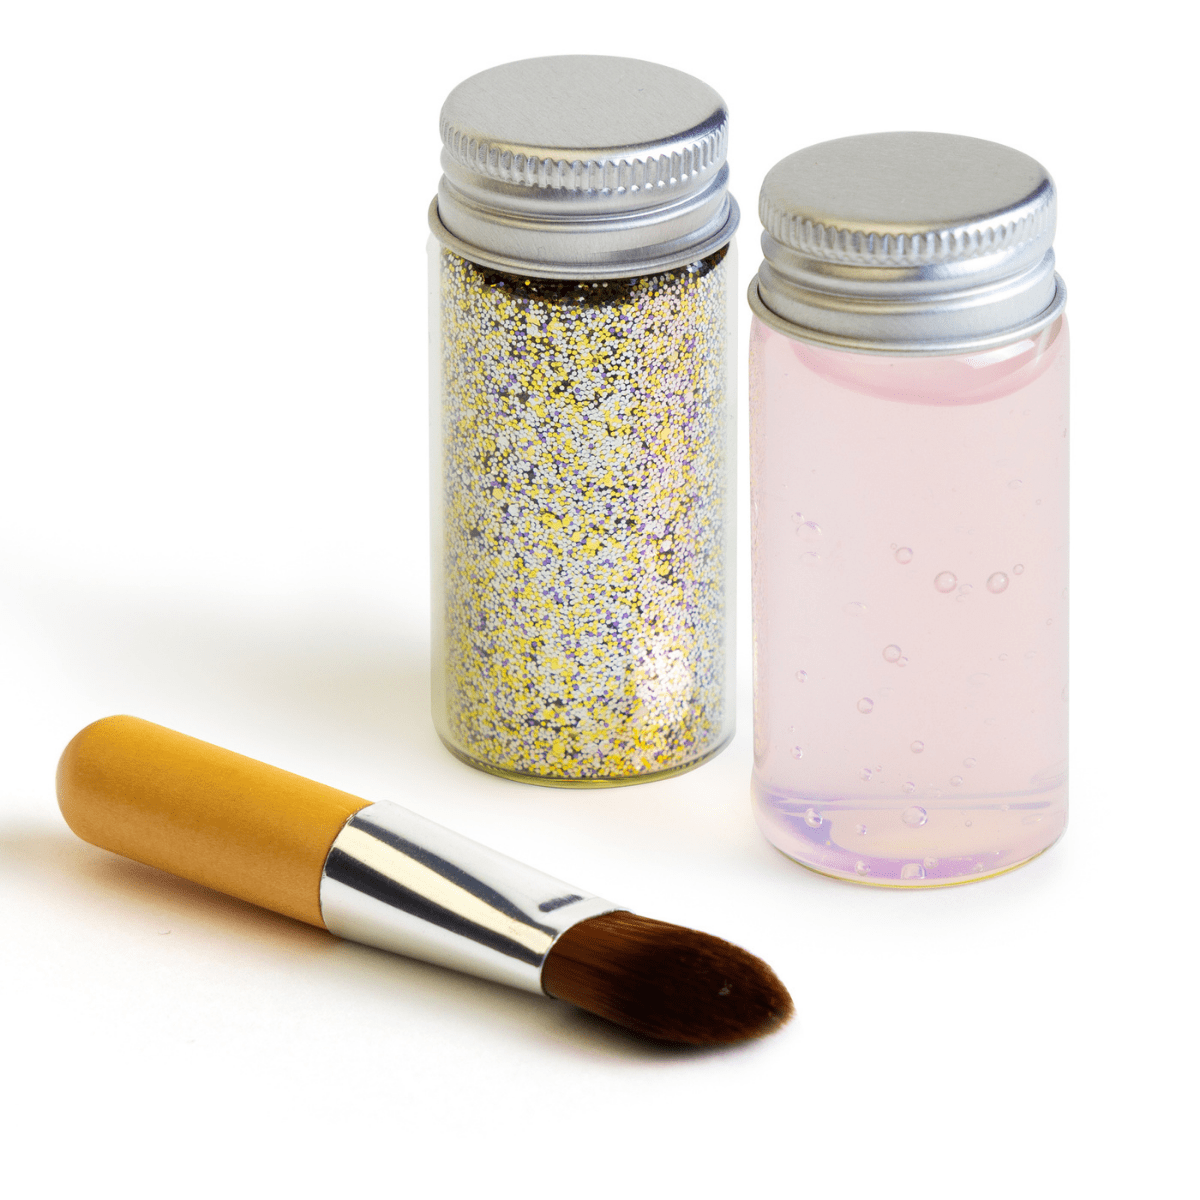 Free to PARTY body glitter kit